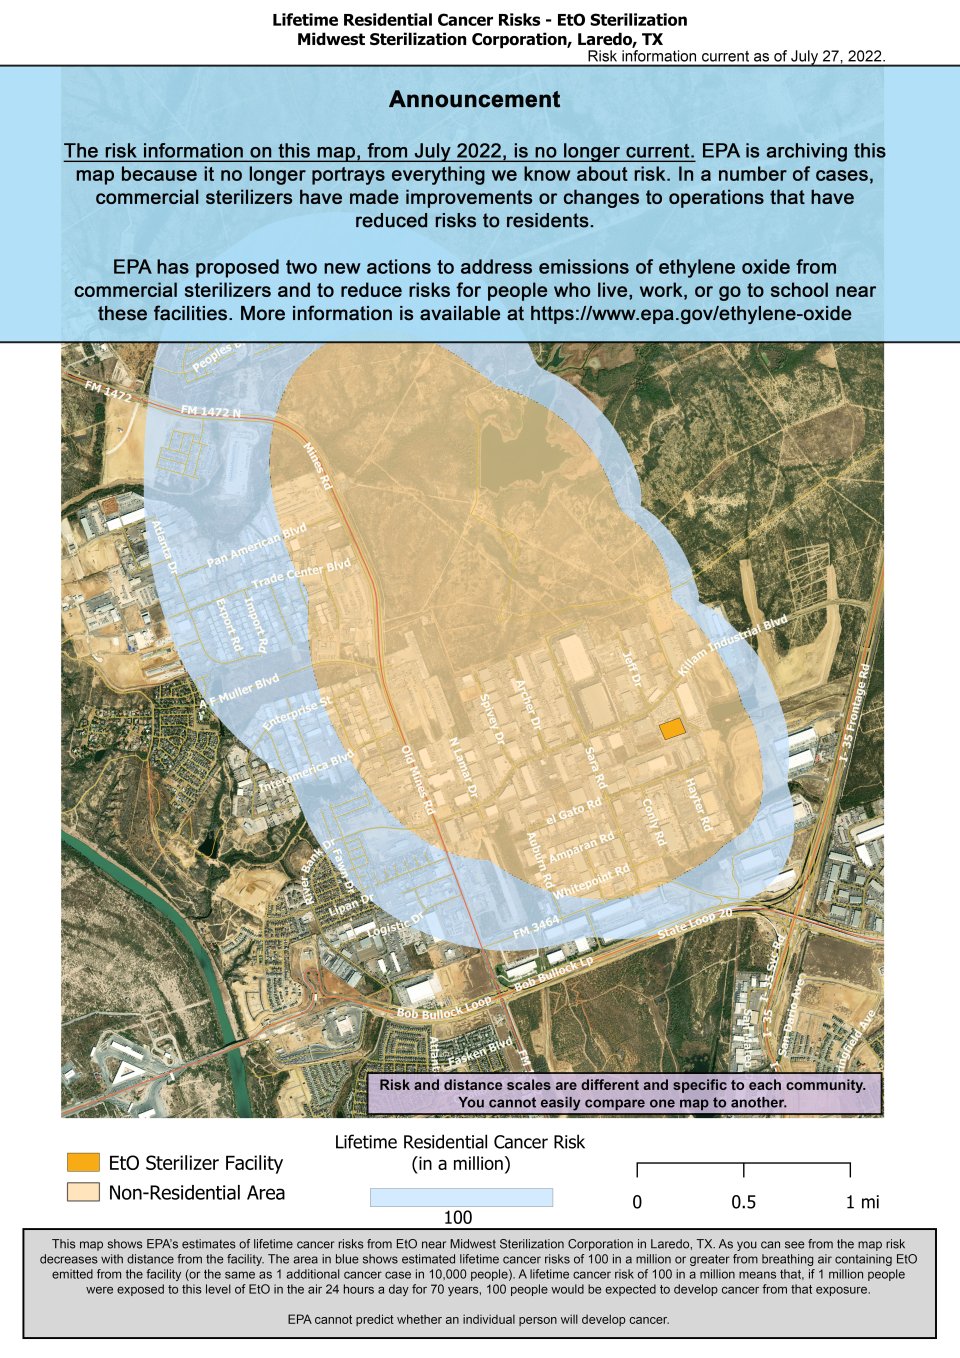 This map shows EPA’s estimate of lifetime cancer risks from breathing ethylene oxide near Midwest Sterilization Corporation, 12010 General Milton Dr, Laredo, TX 78045. Estimated cancer risk decreases with distance from the facility. Nearest the facility, the estimated lifetime cancer risk is 100 in a million. This area extends approximately from Aransas Pass Rd (North), and Atlanta Dr (Northwest), to the intersection of Bob Bullock Loop and I-35 (Southwest). 